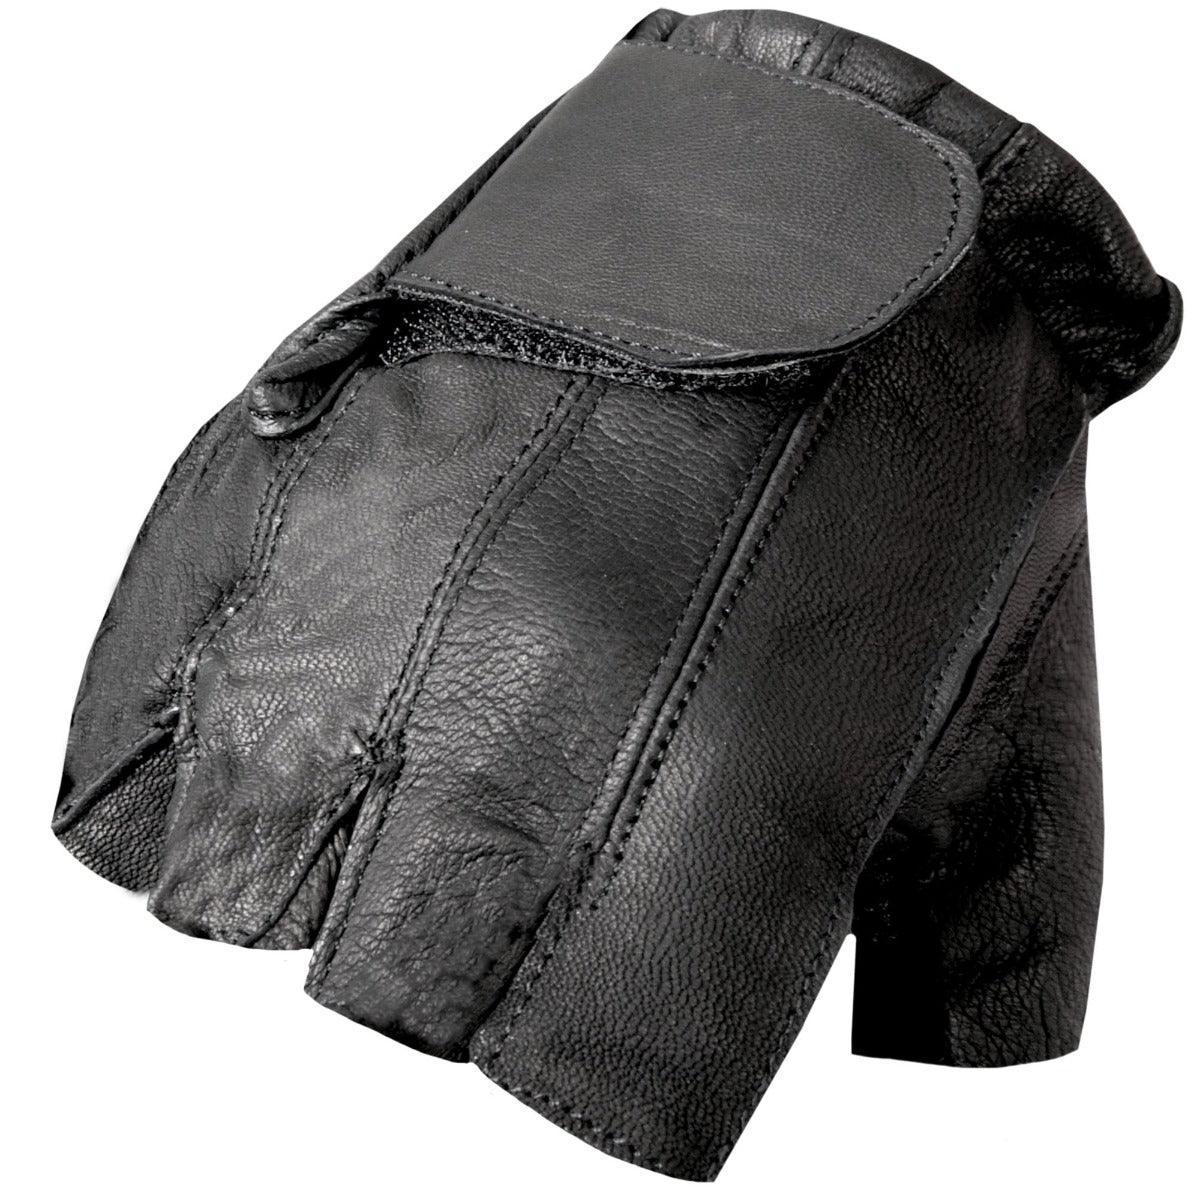 Hot Leathers Naked Leather Fingerless Glove - American Legend Rider